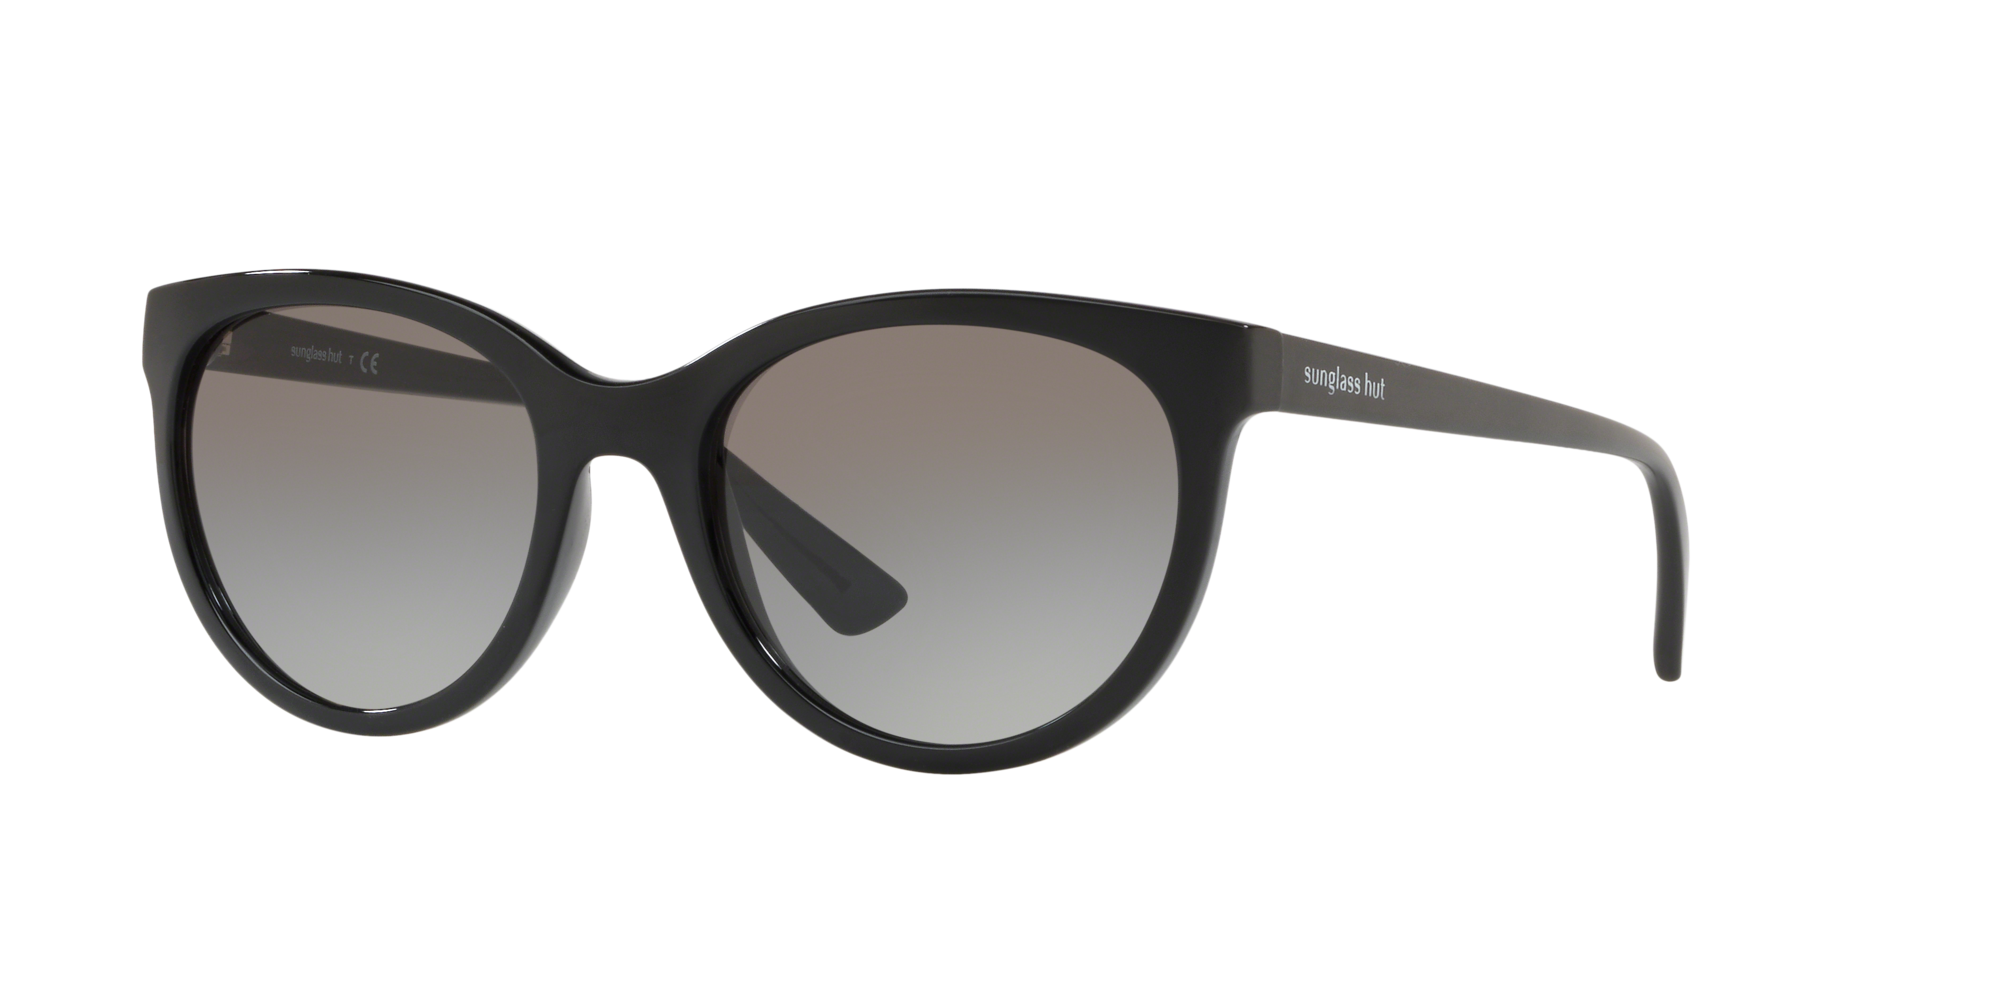 Amazon.com: Sunglass Hut Collection Black : Clothing, Shoes & Jewelry